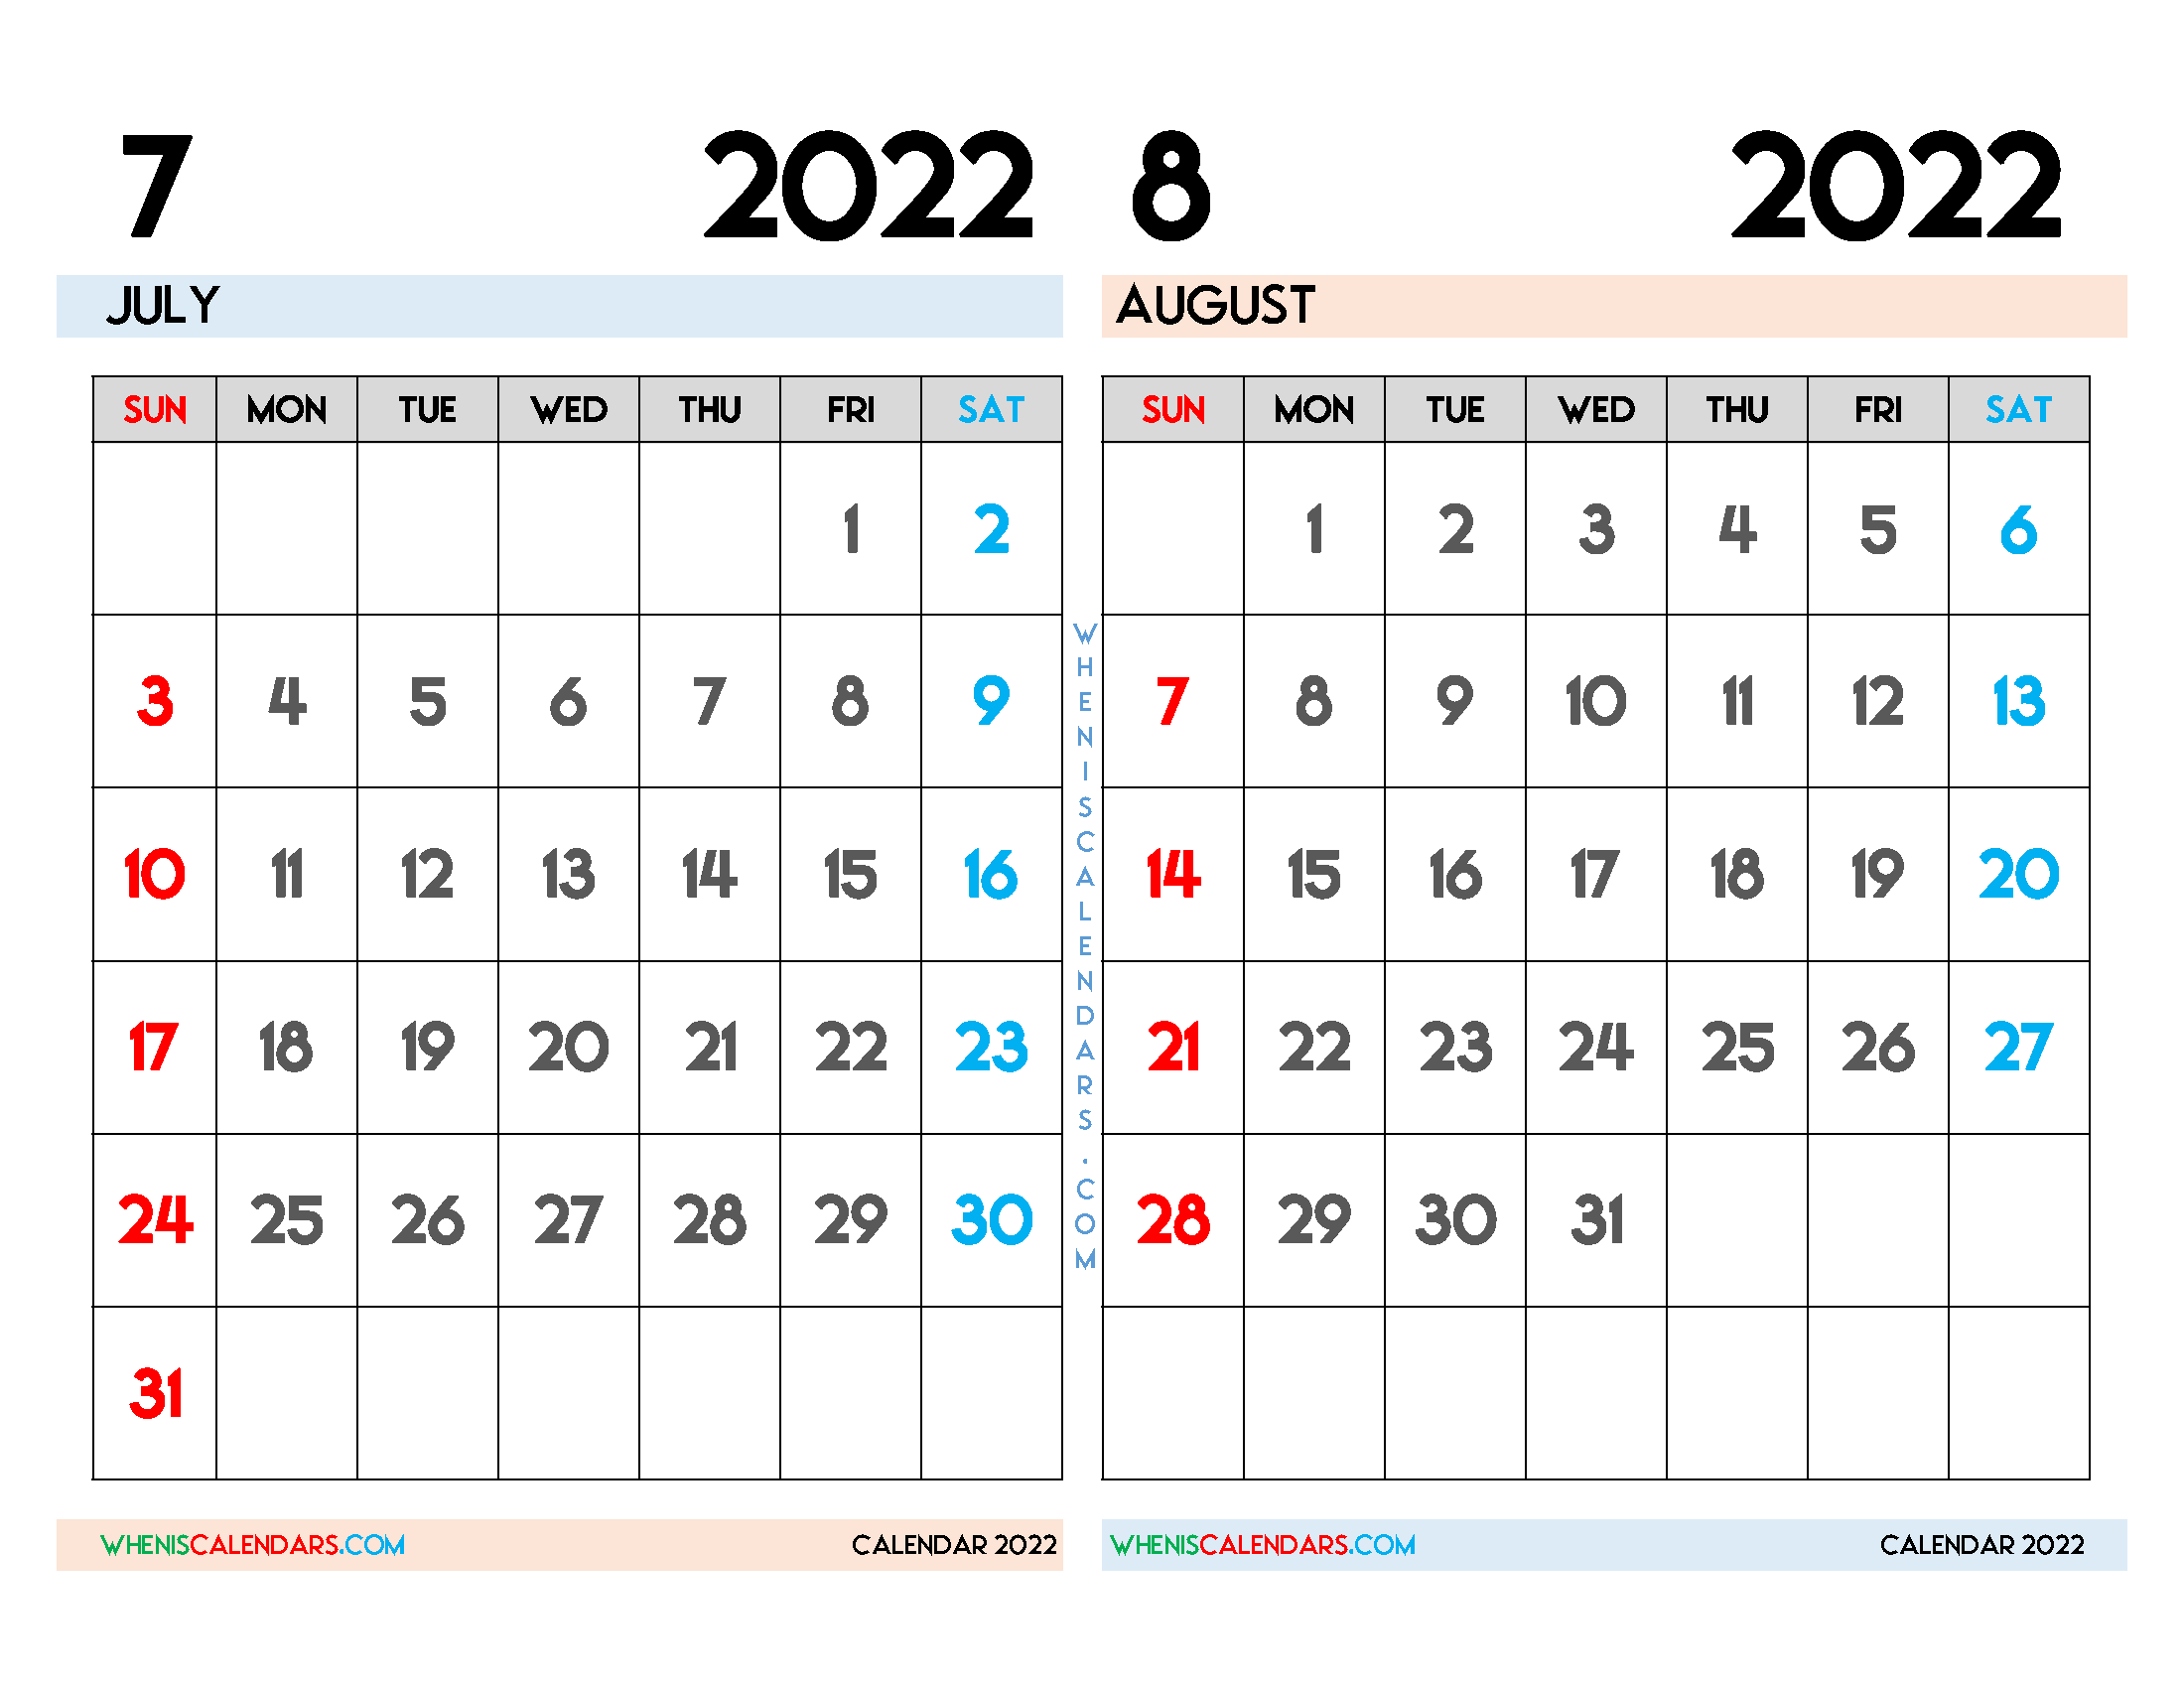 Download Free July and August 2022 Calendar Printable as PDF document and high resolution PNG Image file format